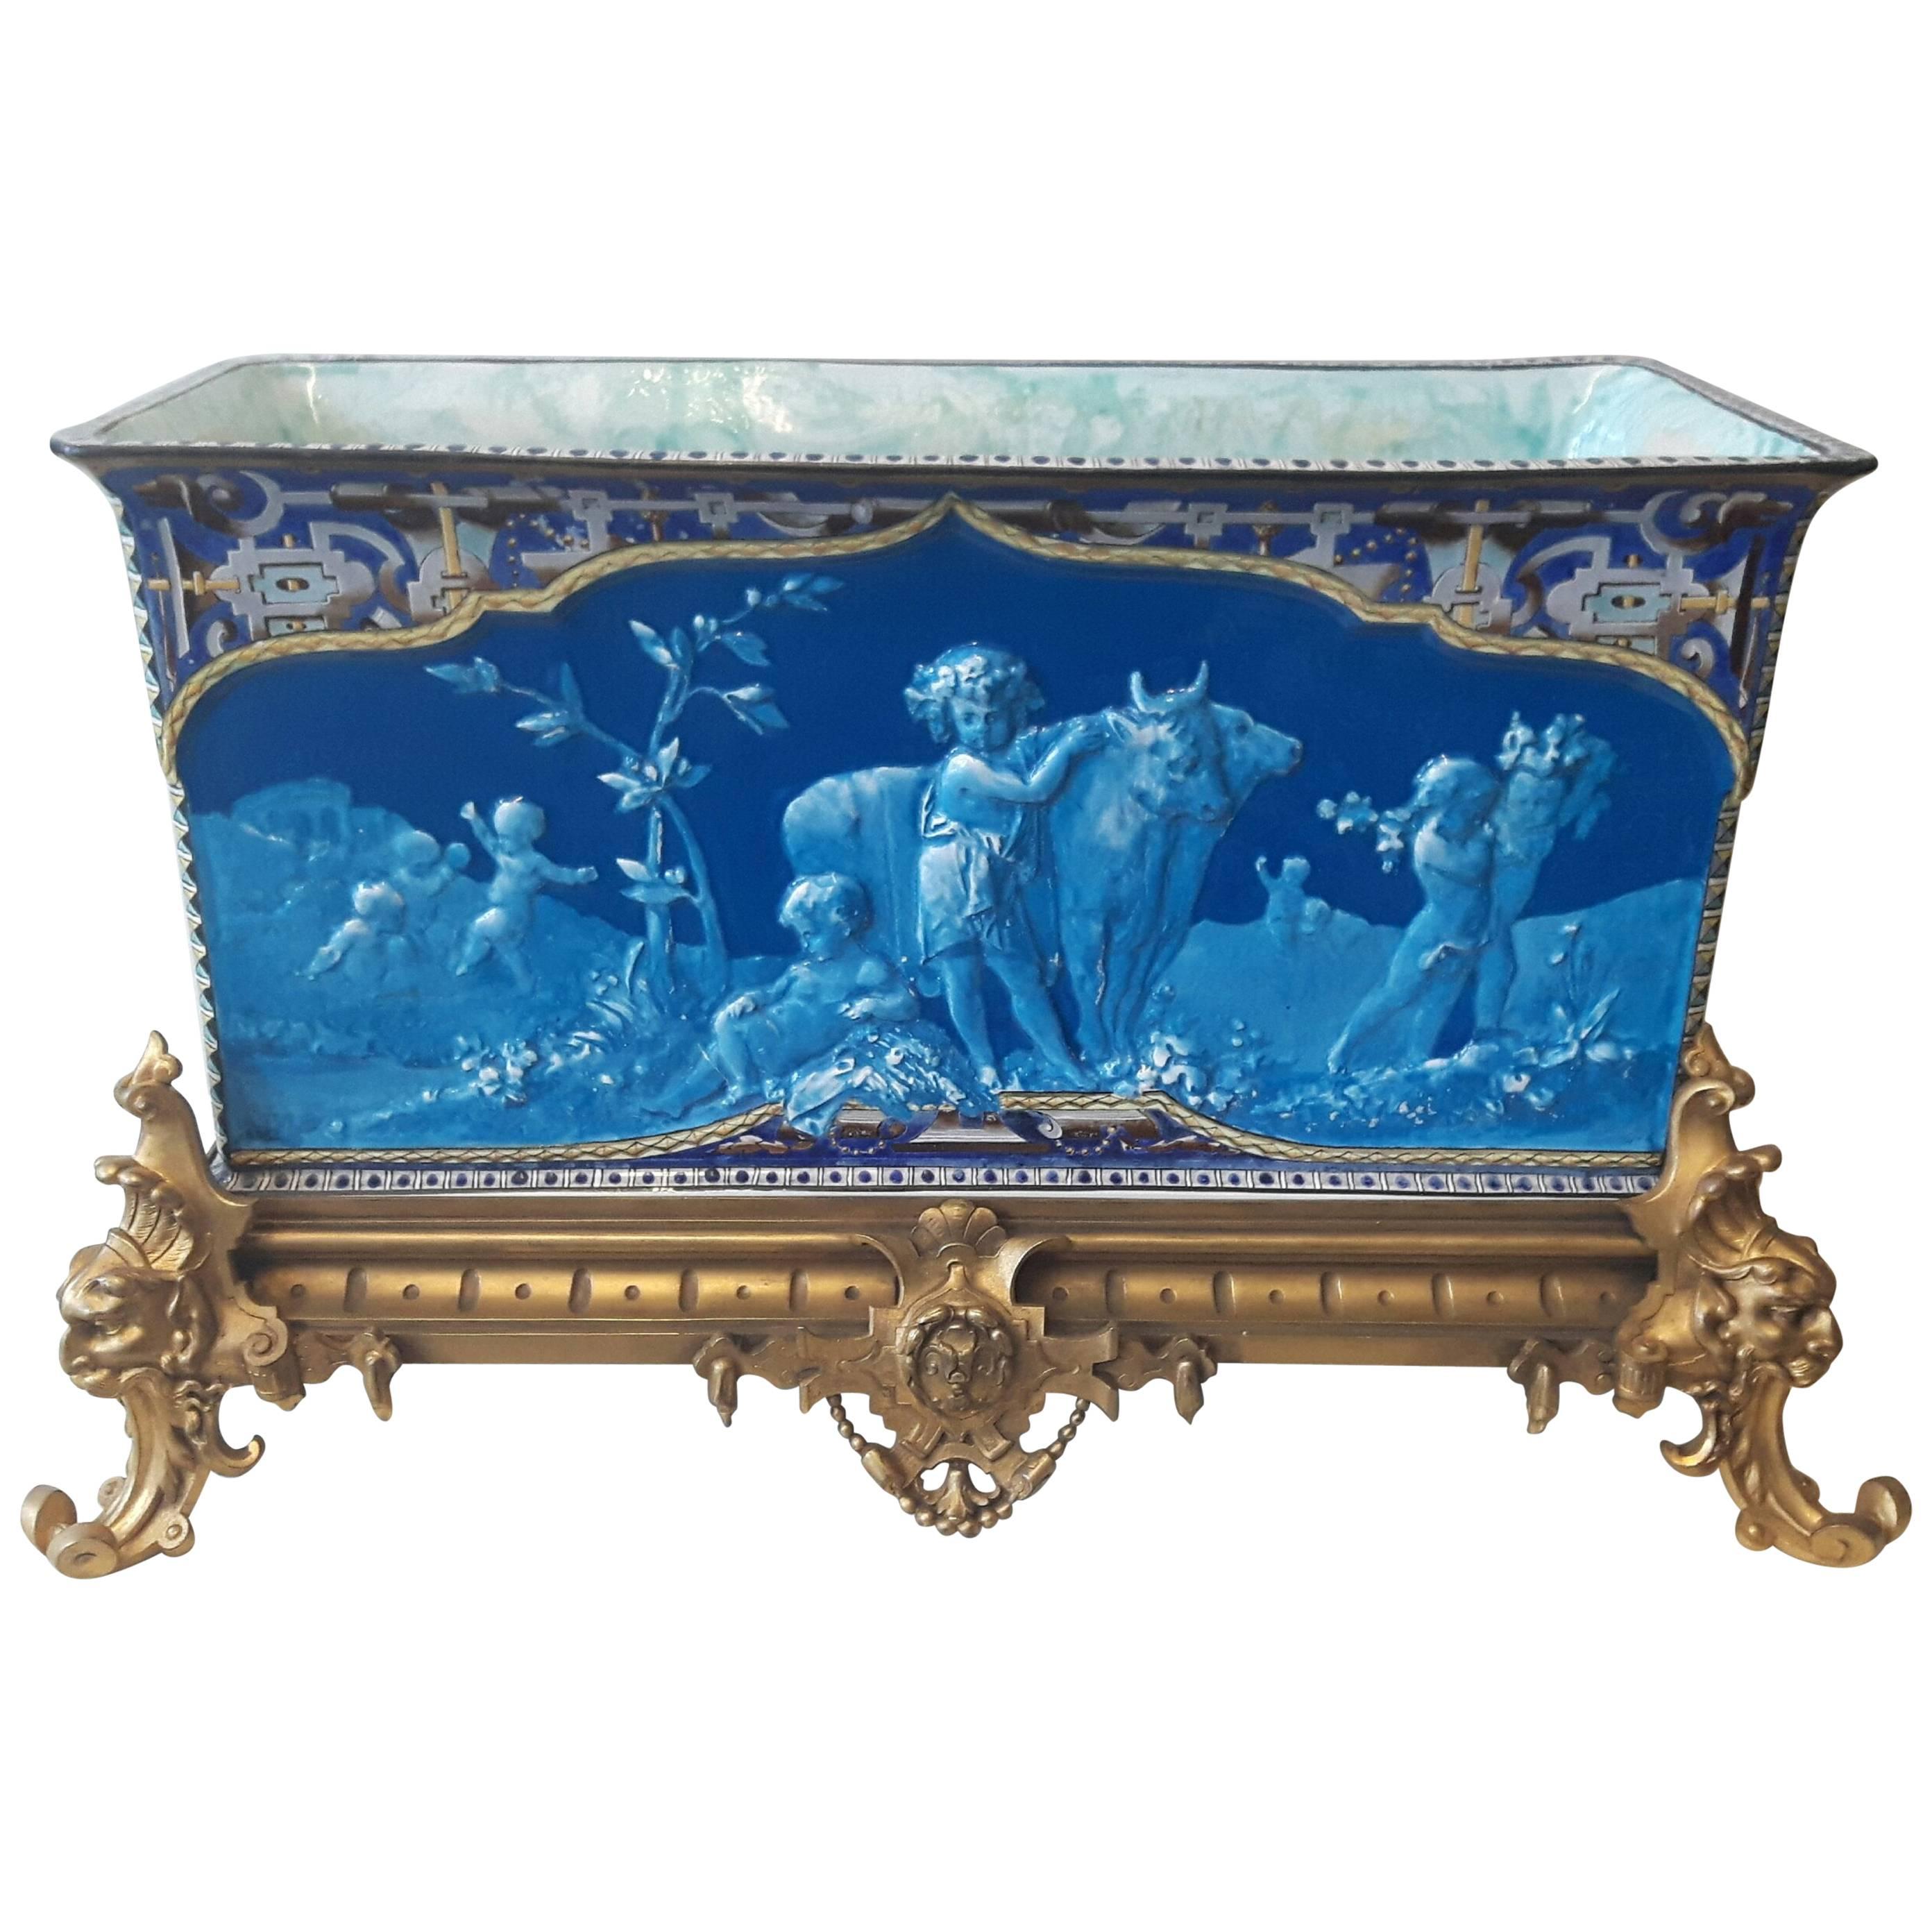 Unique French Barbotine 19th Century Ormolu Mounted Rectangular Jardinière For Sale